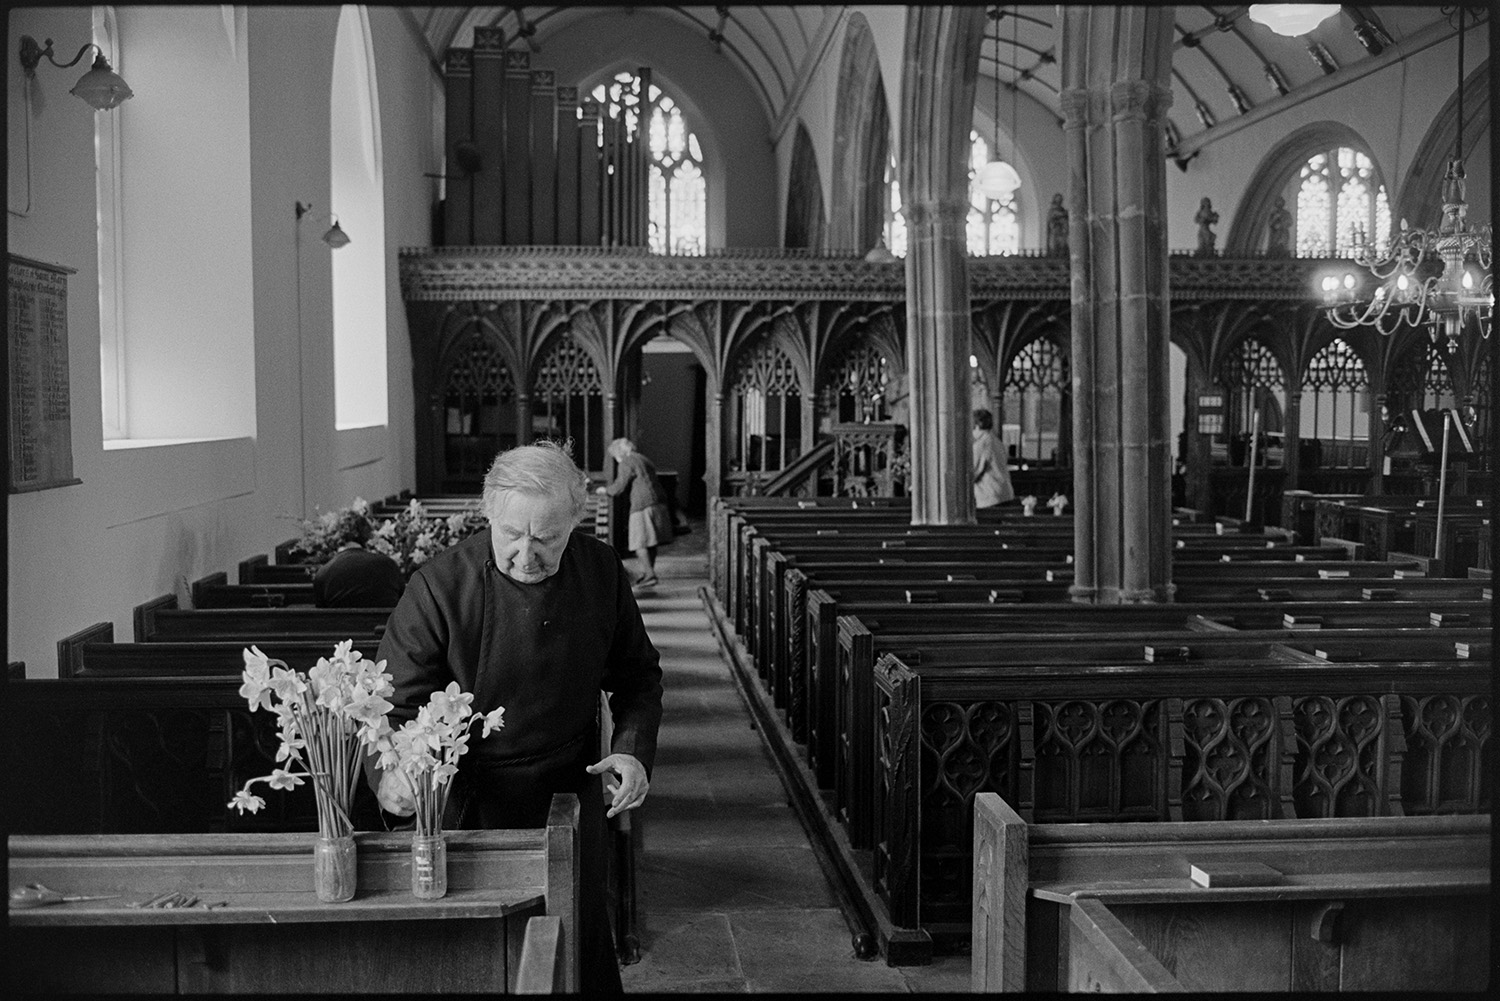 Easter flowers in church. Women chatting and arranging. Fine screen.
[The vicar placing jars of daffodils on a shelf at Chulmleigh Church for the Easter decoration of the church. Carved wooden box pews and a rood screen can be seen in the church.]